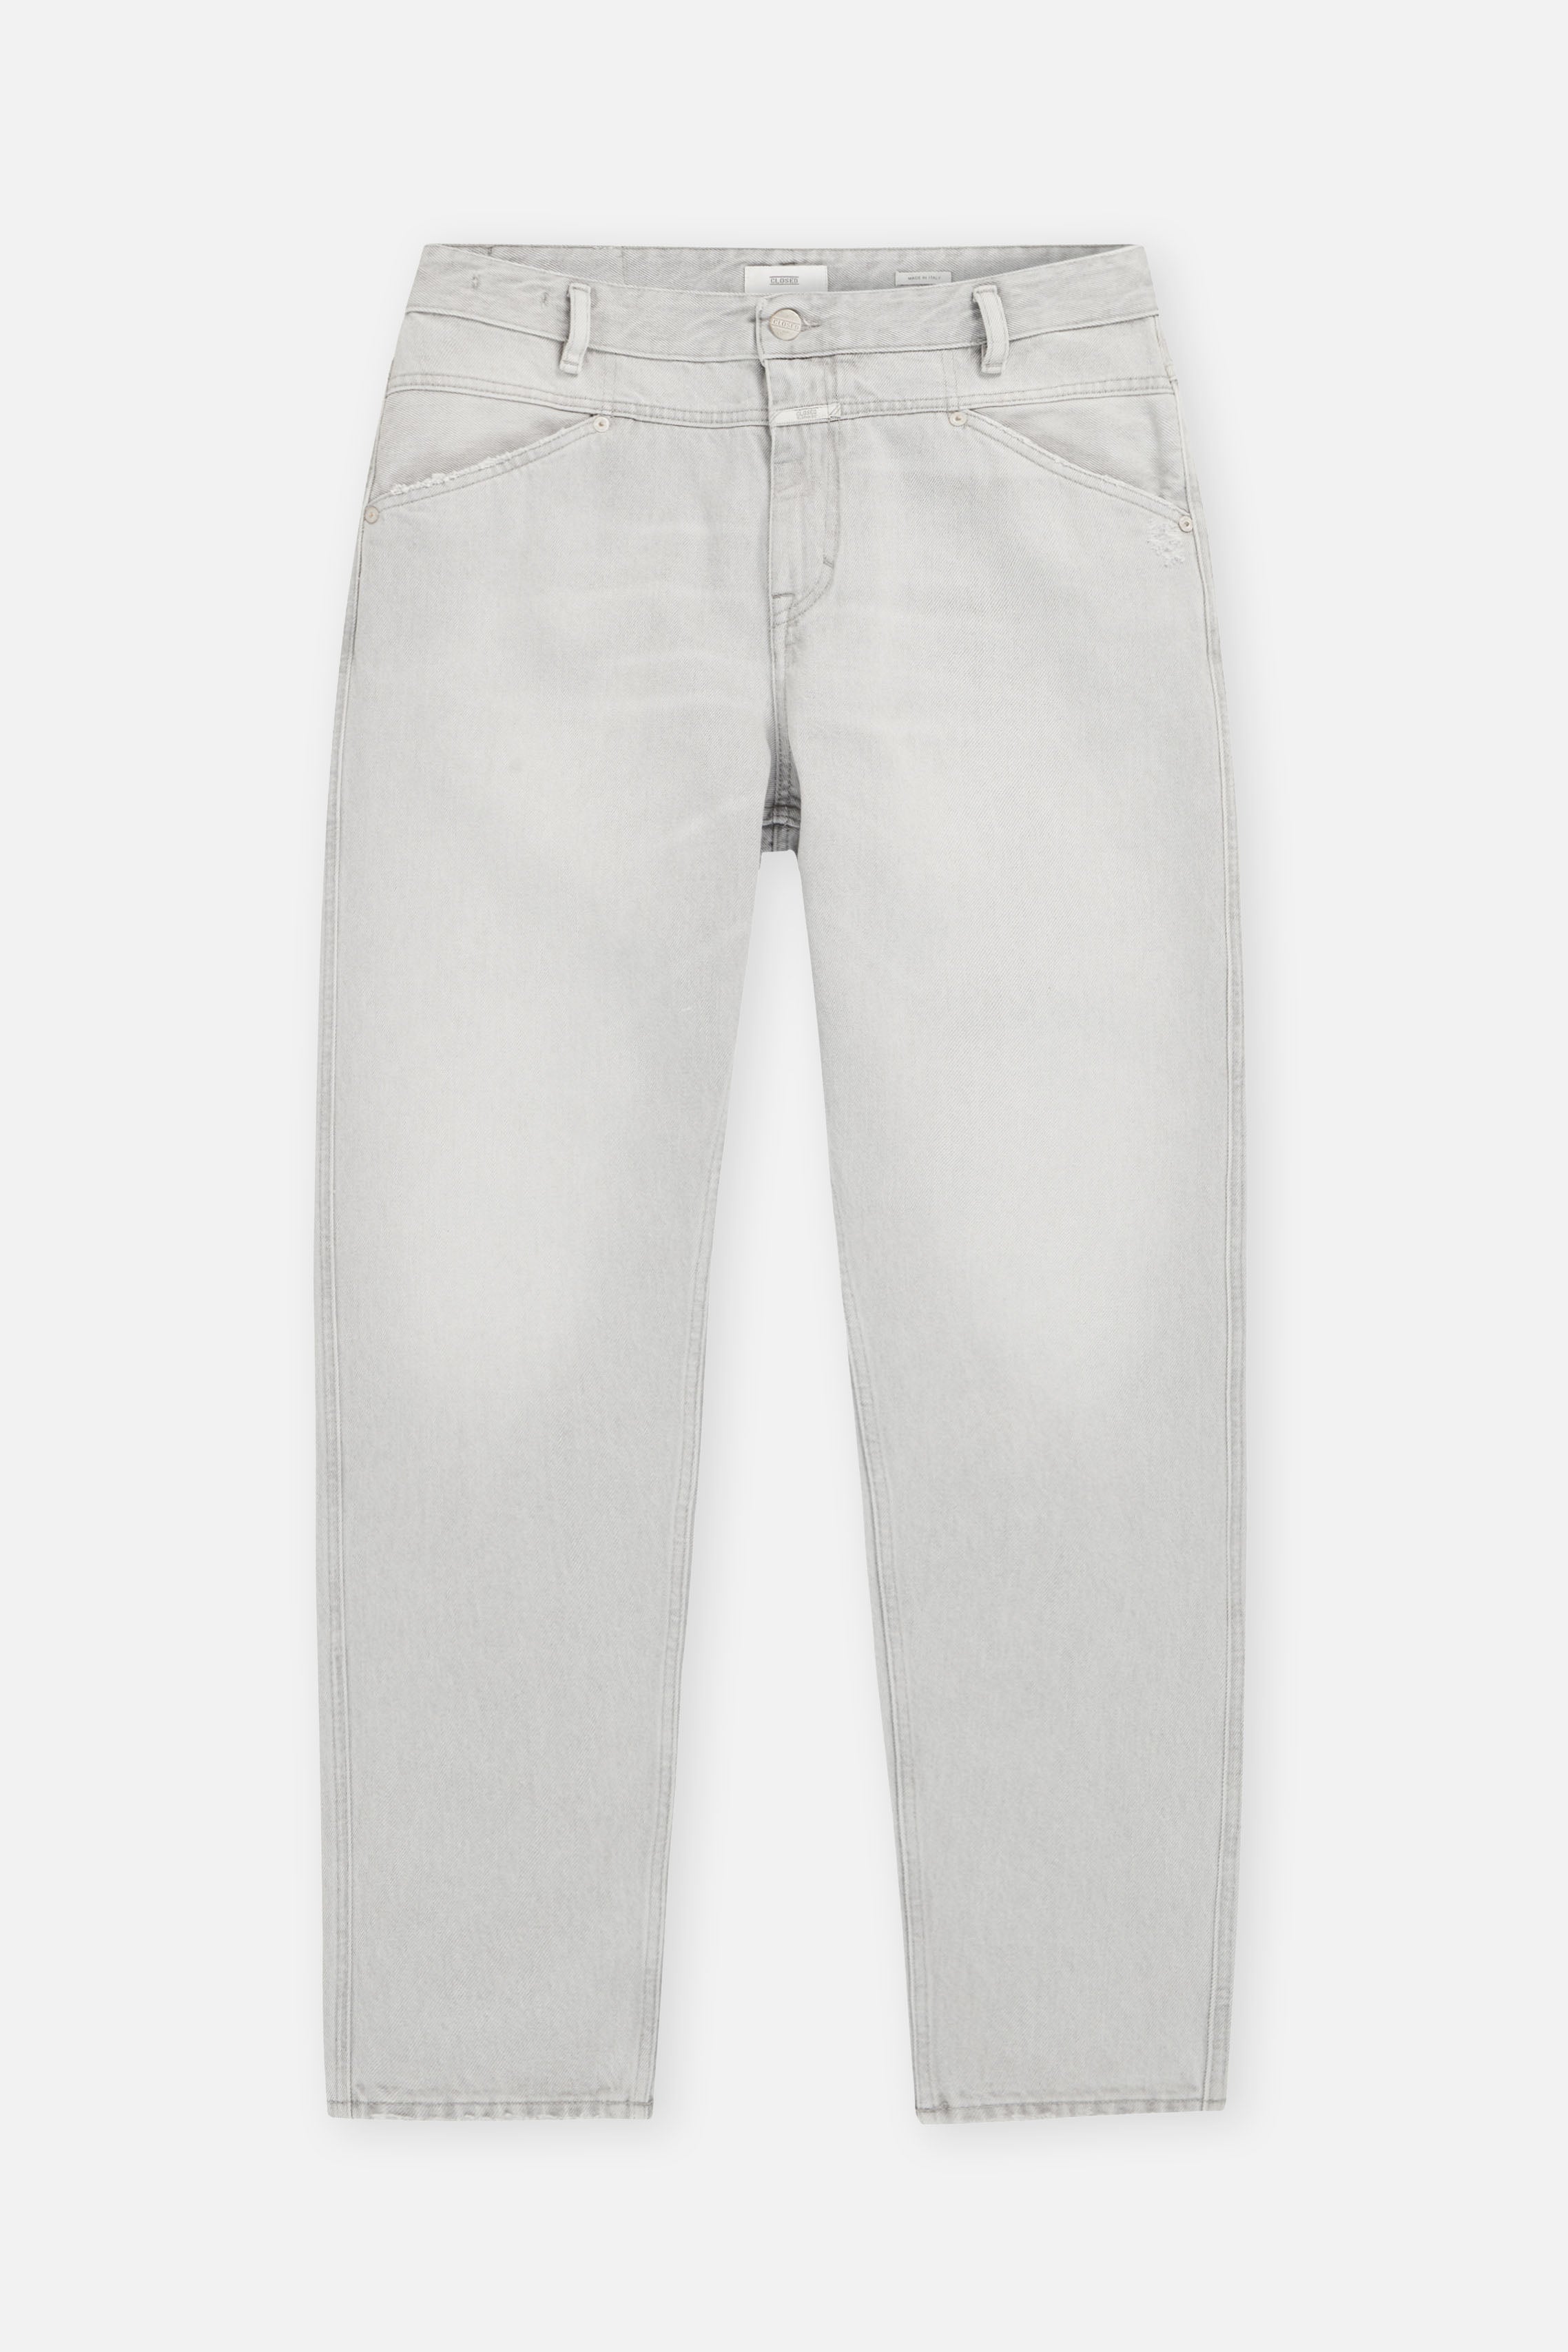 STYLE NAME X-LENT TAPERED JEANS